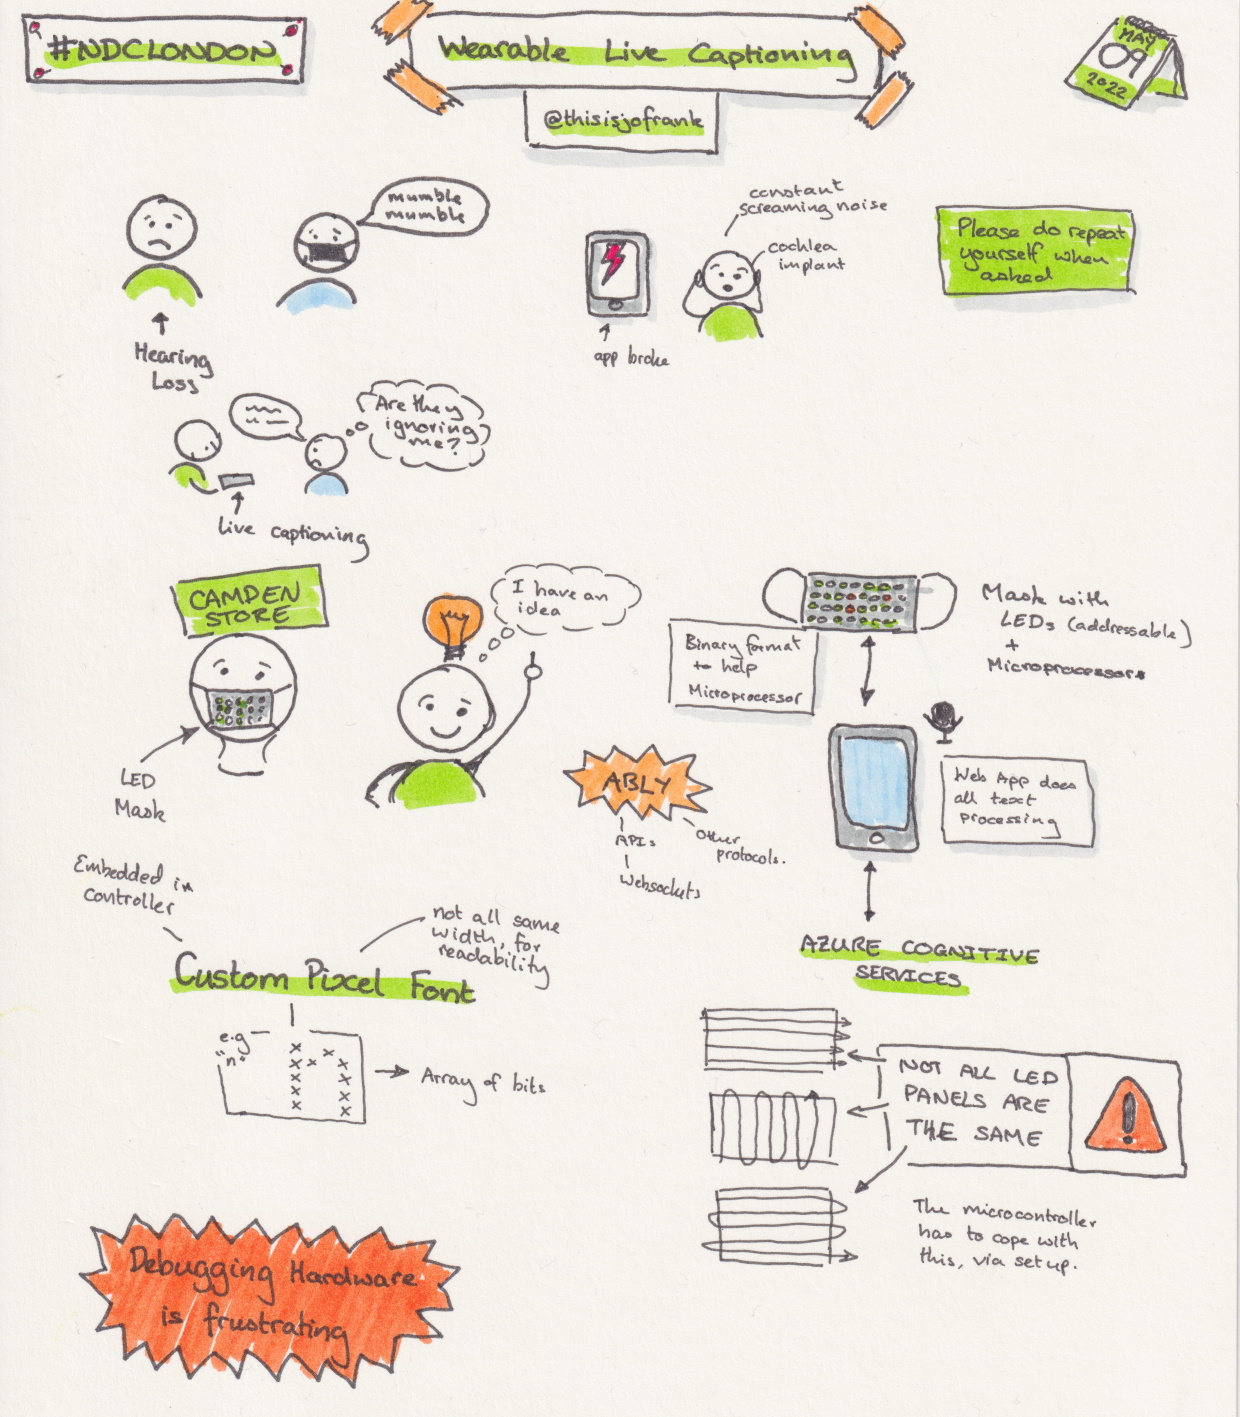 Sketchnotes from the talk 'Wearable live captioning' by Jo Franchetti at NDC London 2022